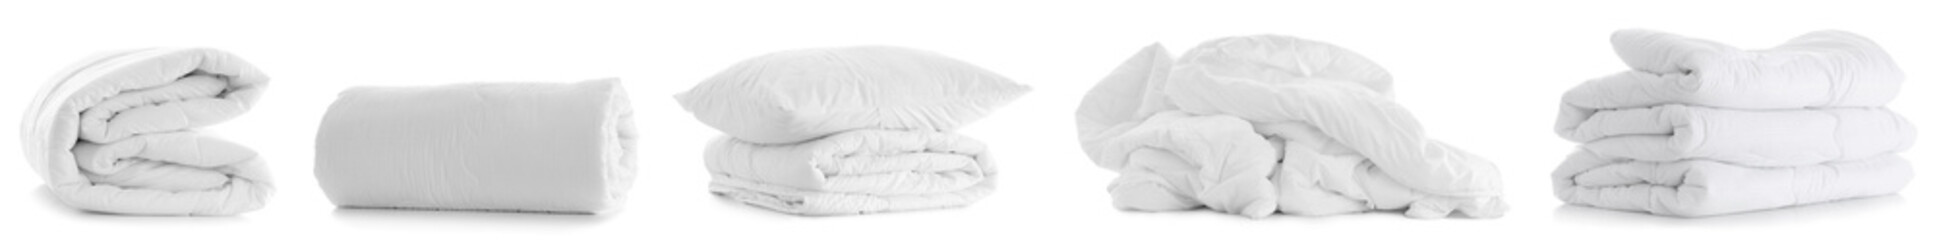 Set of soft blankets and pillow on white background